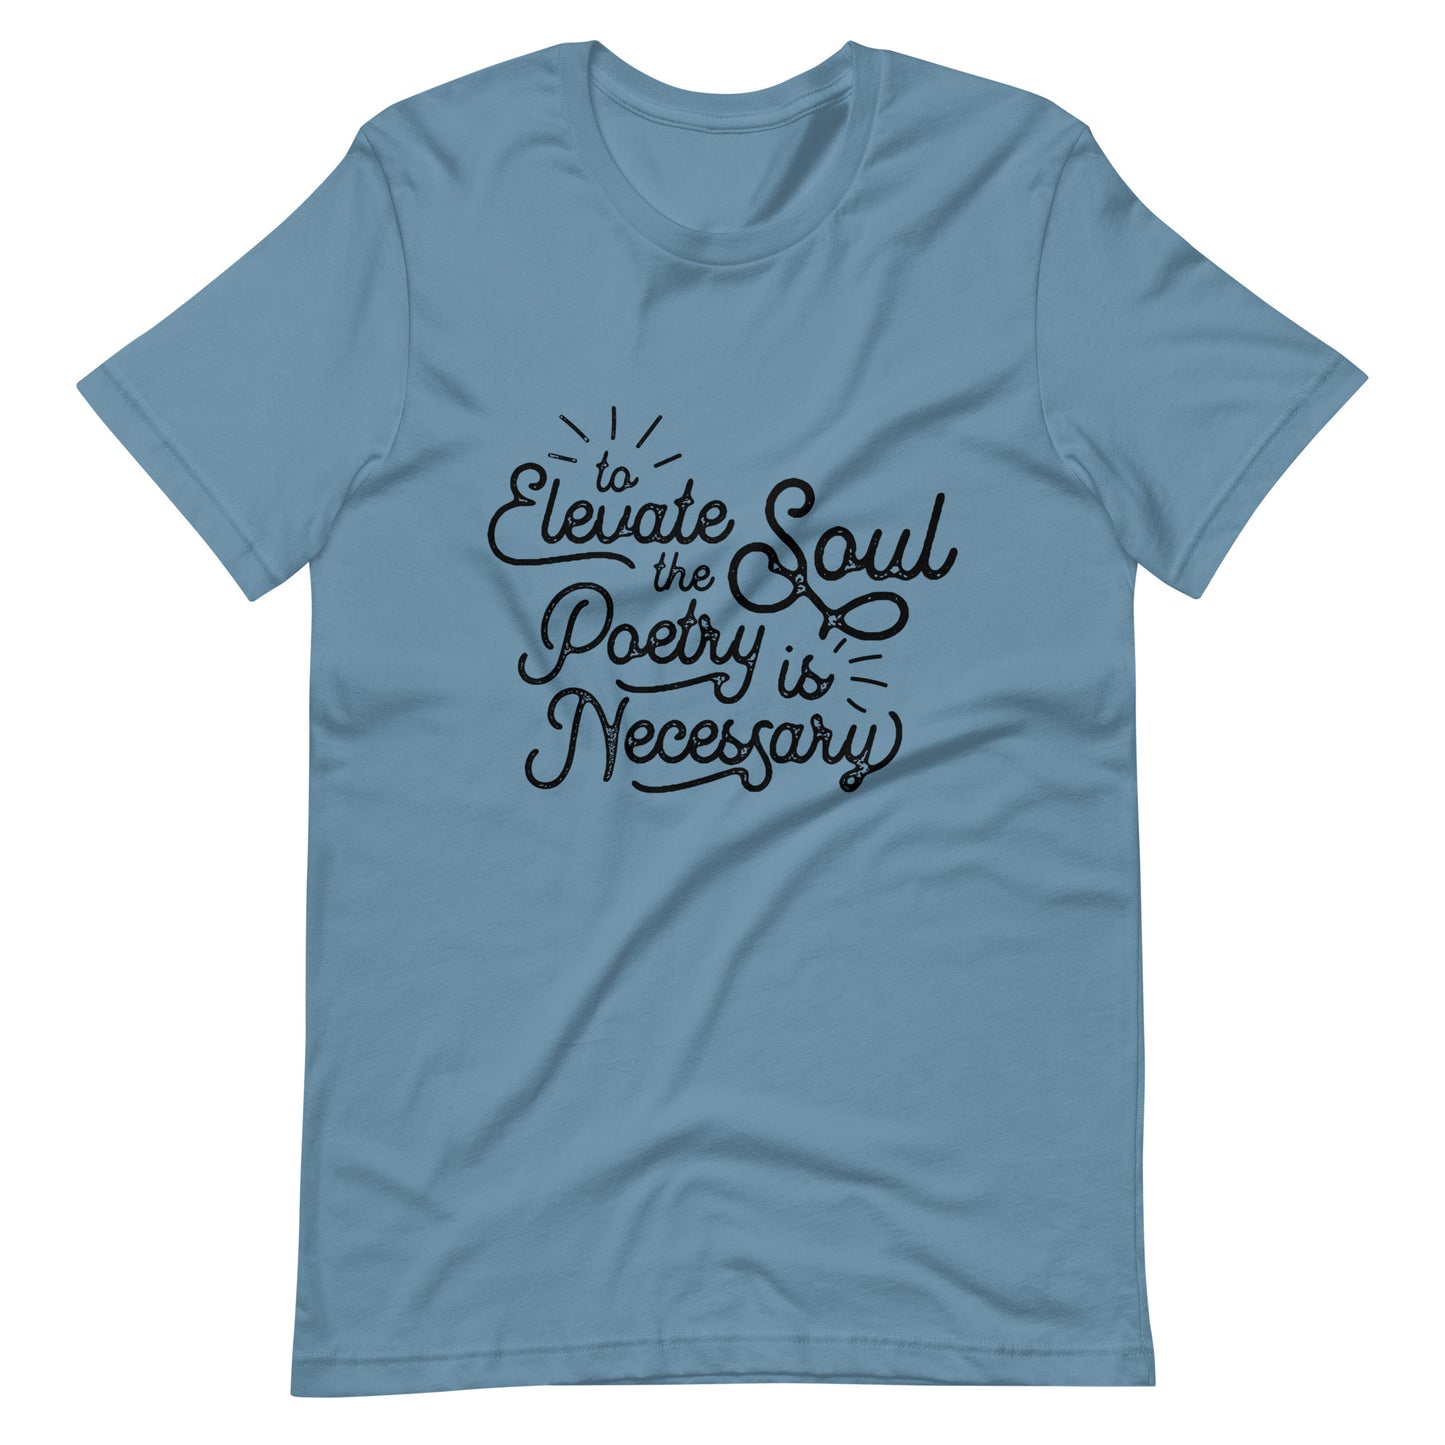 To Elevate the Soul Edgar Allan Poe Quote - Men's t-shirt - Steel Blue Front